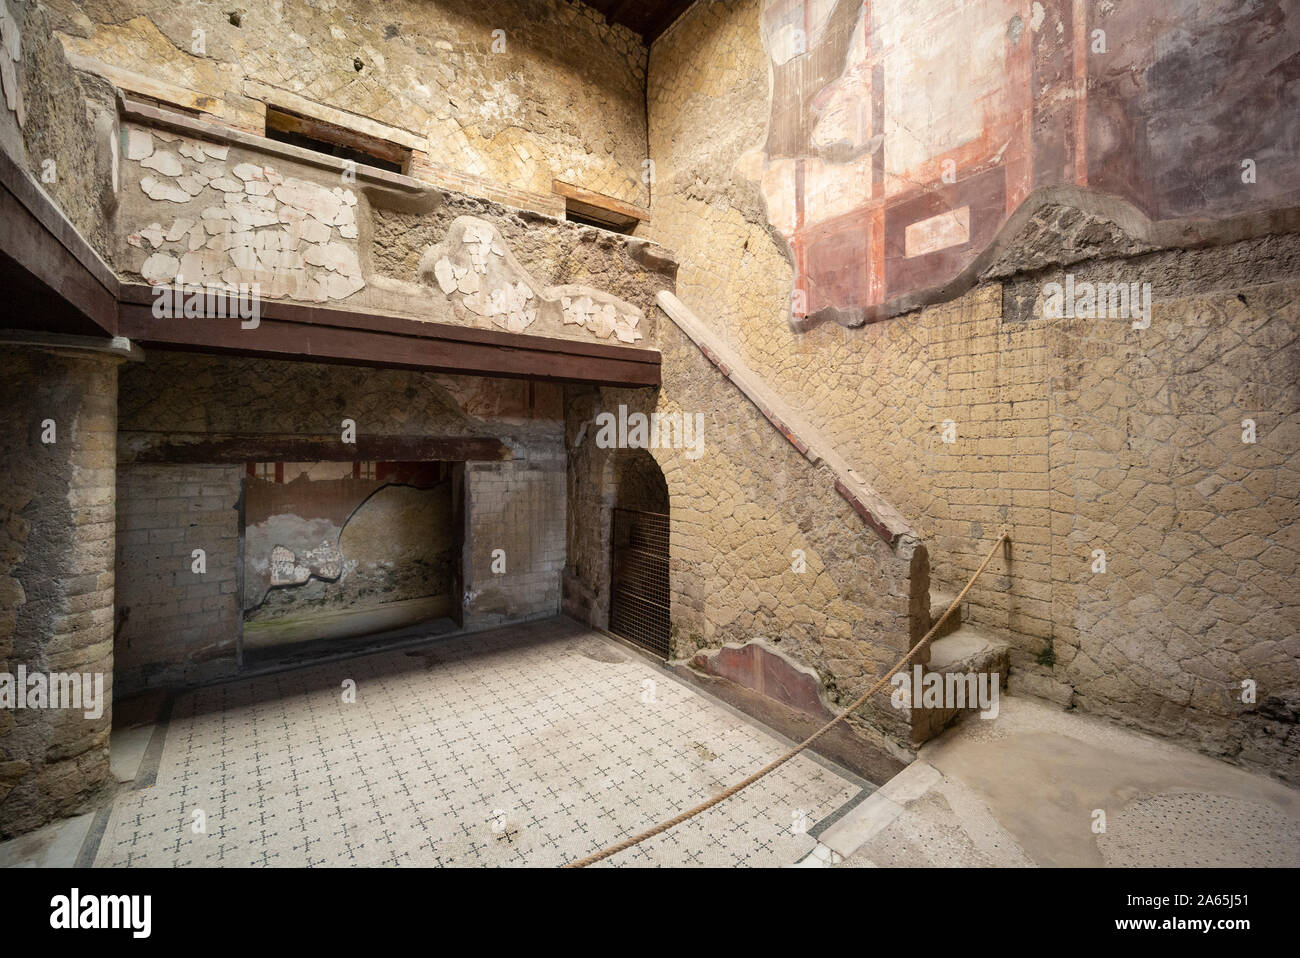 Ercolano. Italy. Archaeological site of Herculaneum. Casa del Bel Cortile (House of the Beautiful Courtyard)  House number 8 - Insula V - Casa del Bel Stock Photo